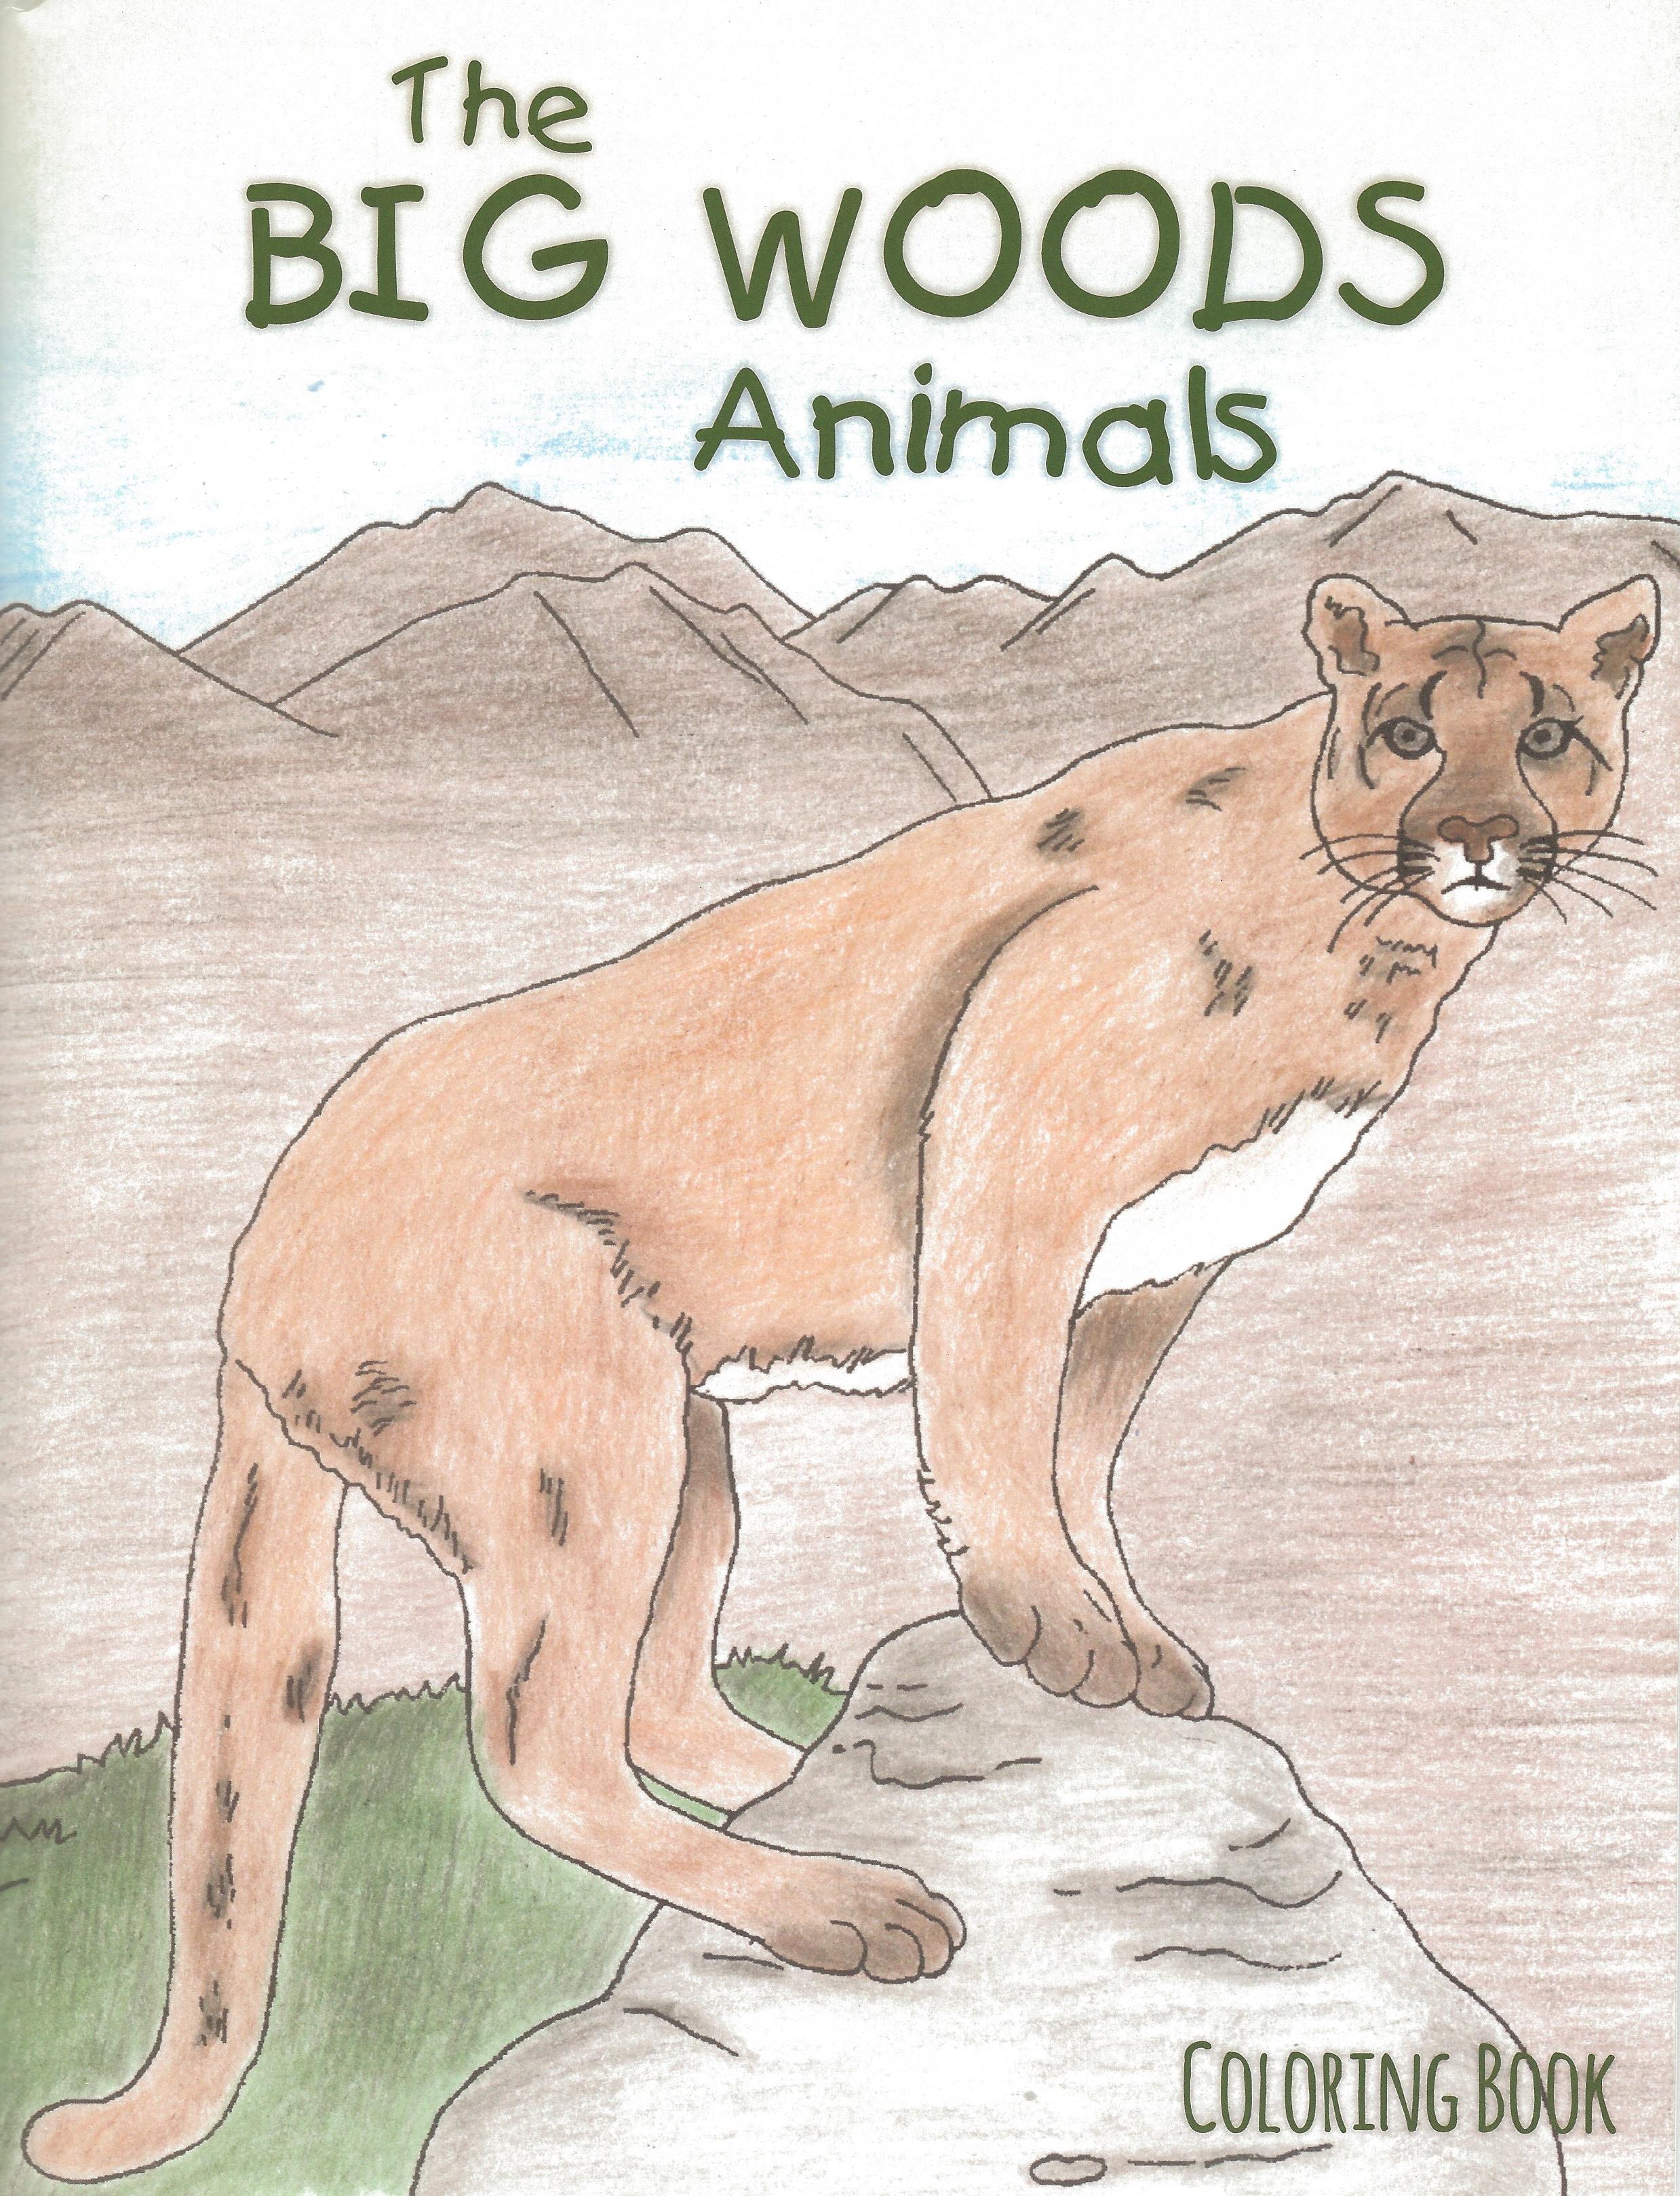 THE BIG WOODS ANIMALS Coloring Book